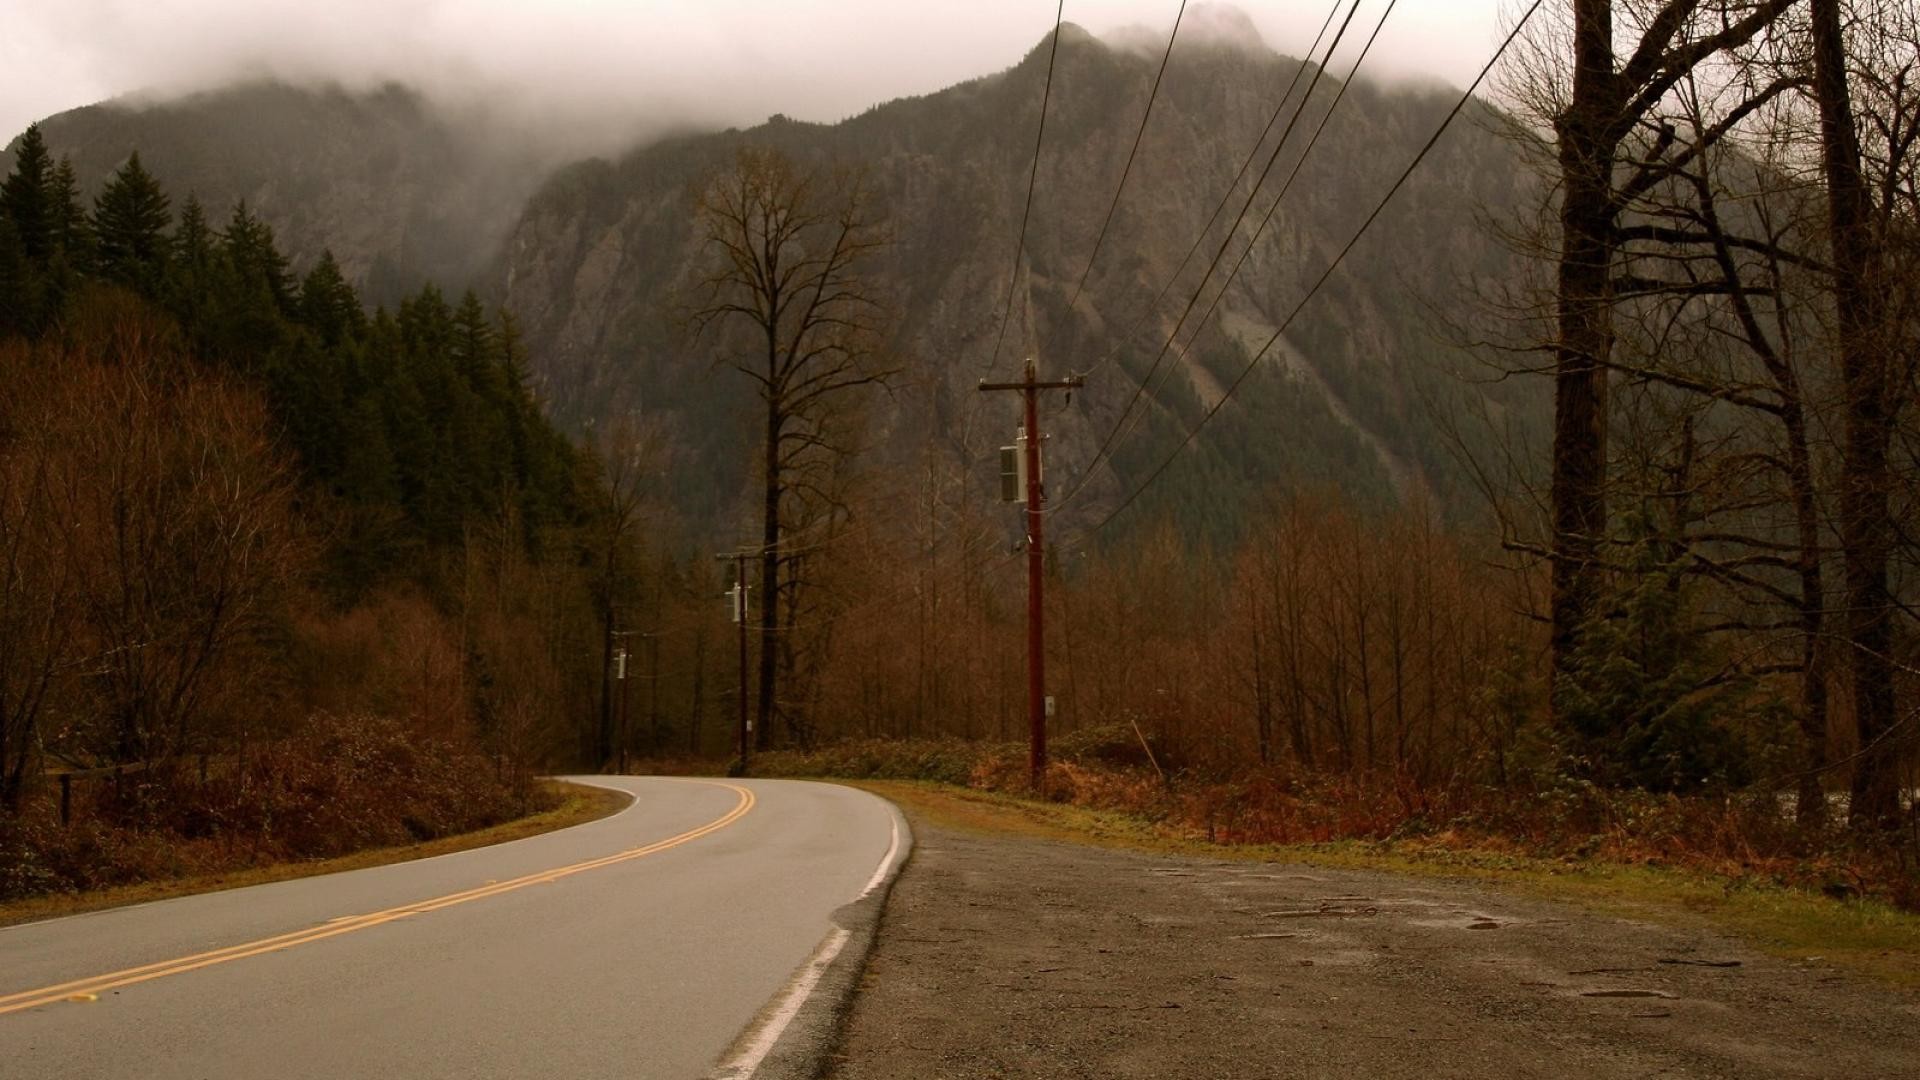 General 1920x1080 twin peaks David Lynch TV series TV road mist trees forest mountains nature